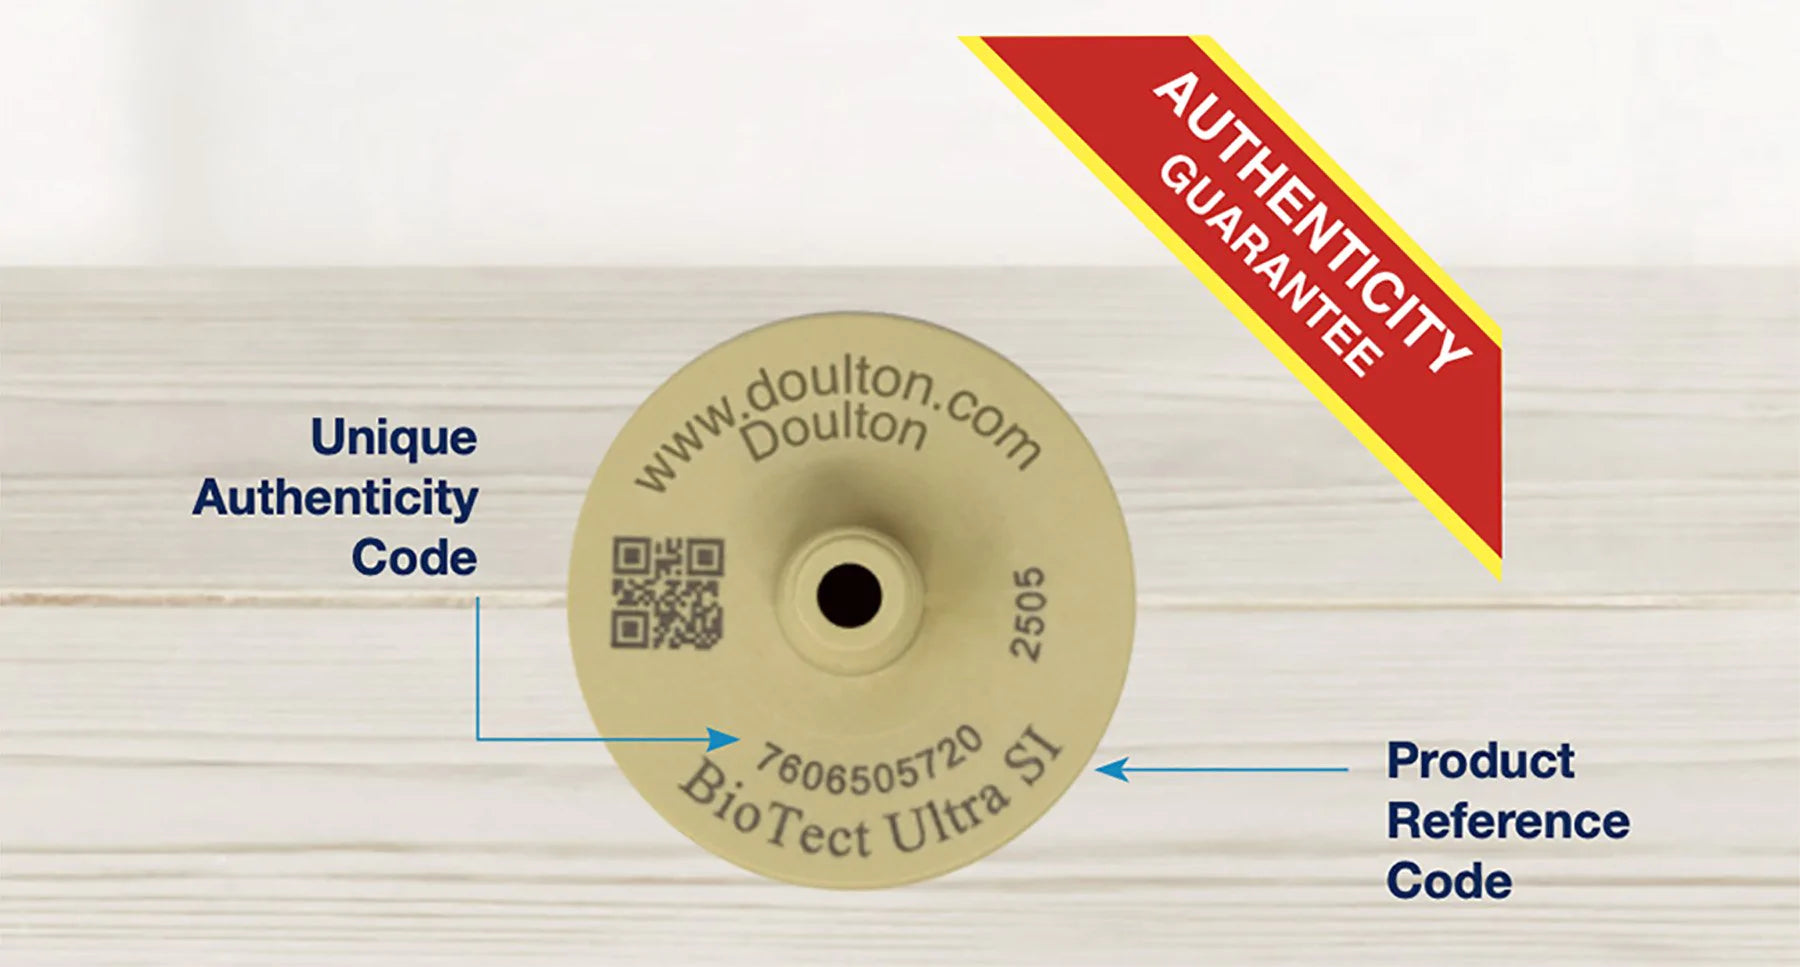 Doulton BioTect Ultra Ceramic Drinking Water Filters